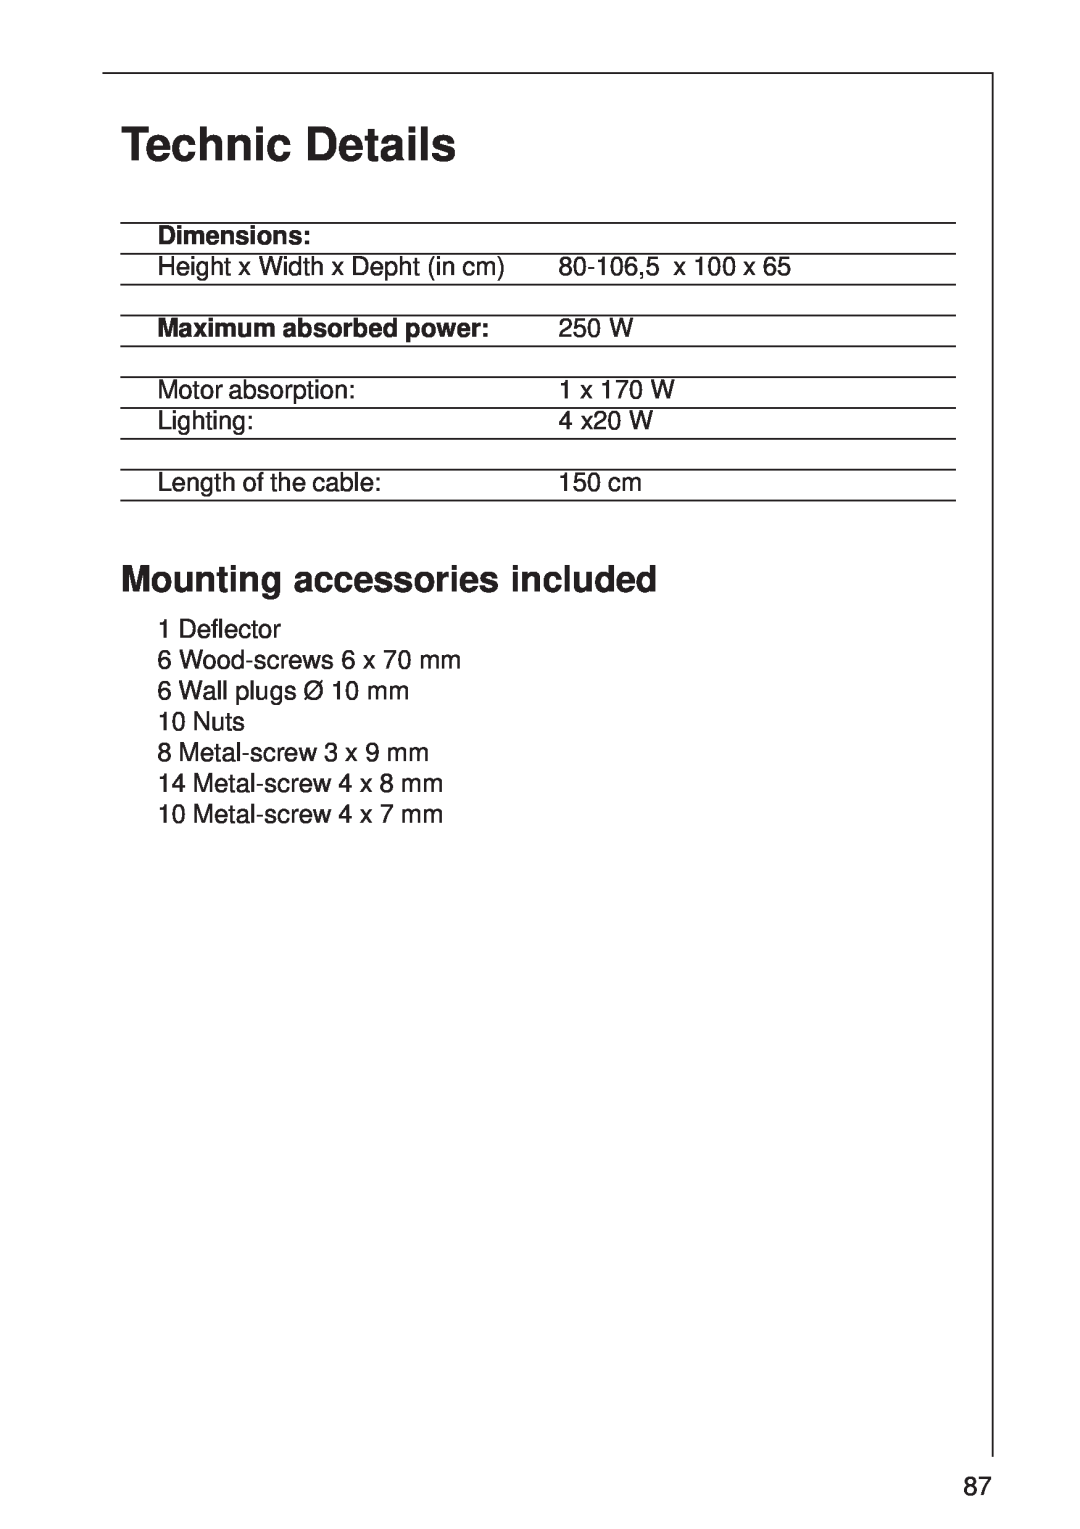 AEG DI 8610 manual Technic Details, Mounting accessories included 